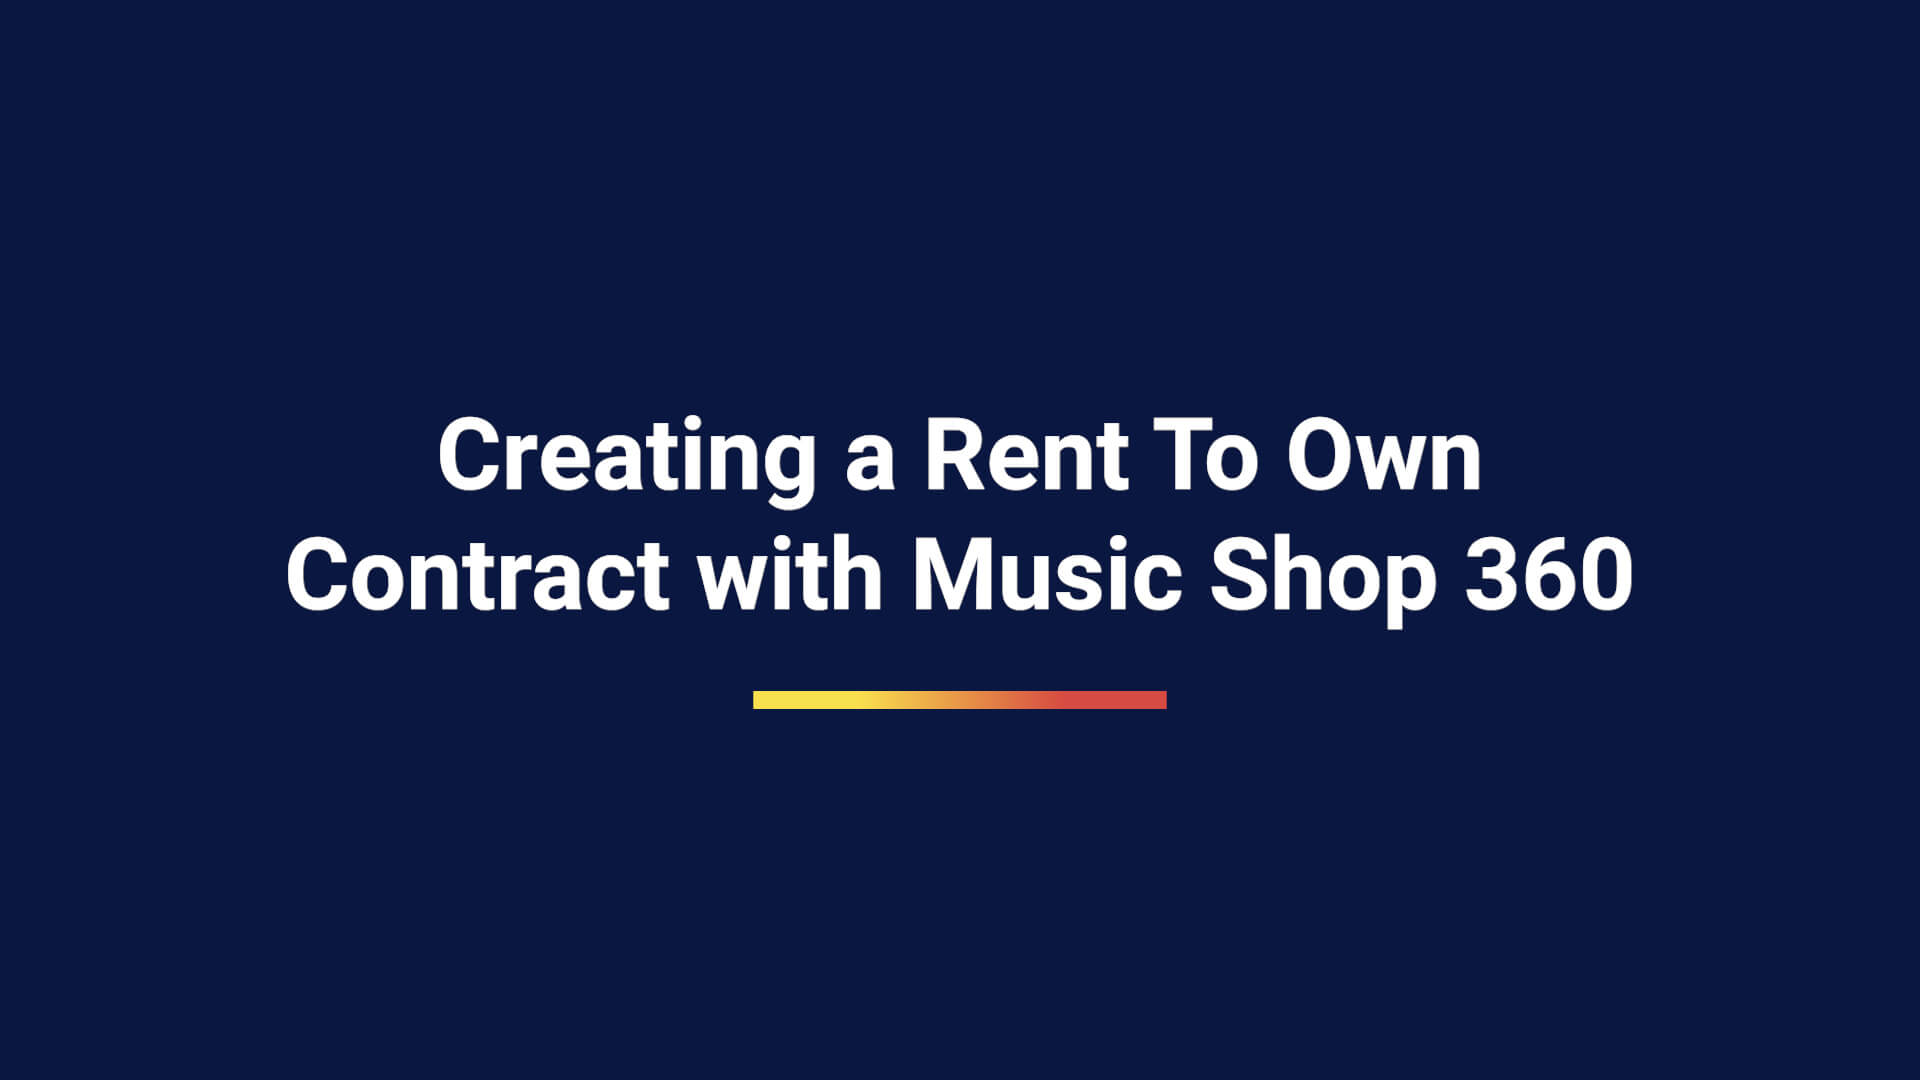 Creating a Rent To Own Contract